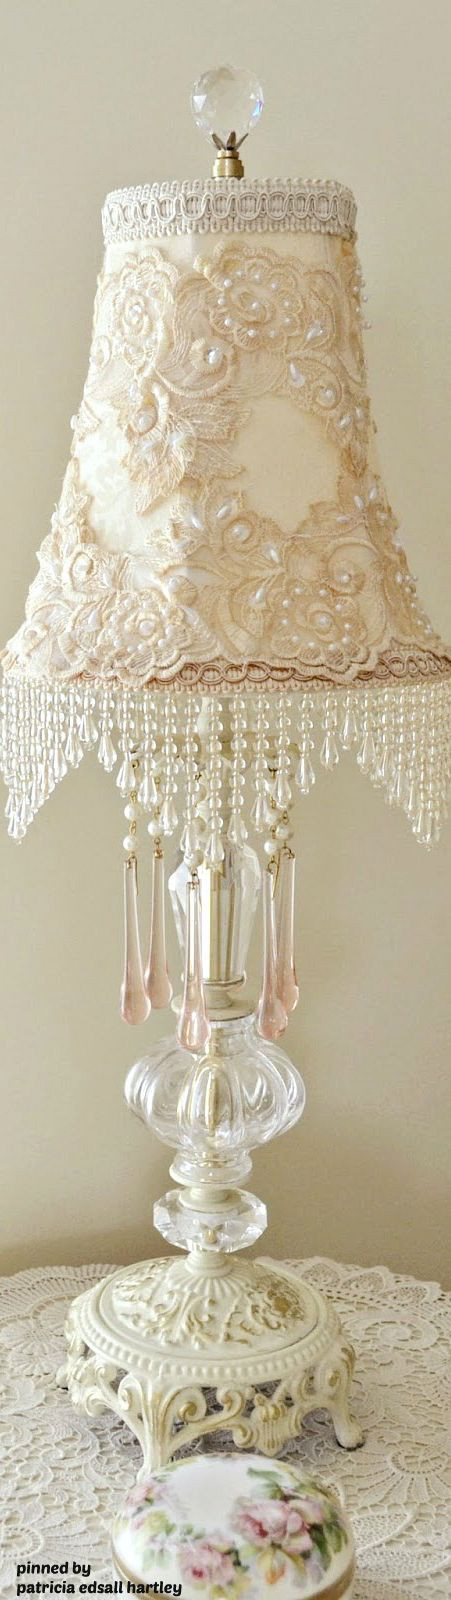 Shabby Chic Bedroom Lamps
 735 best shabby chic lampshades images on Pinterest